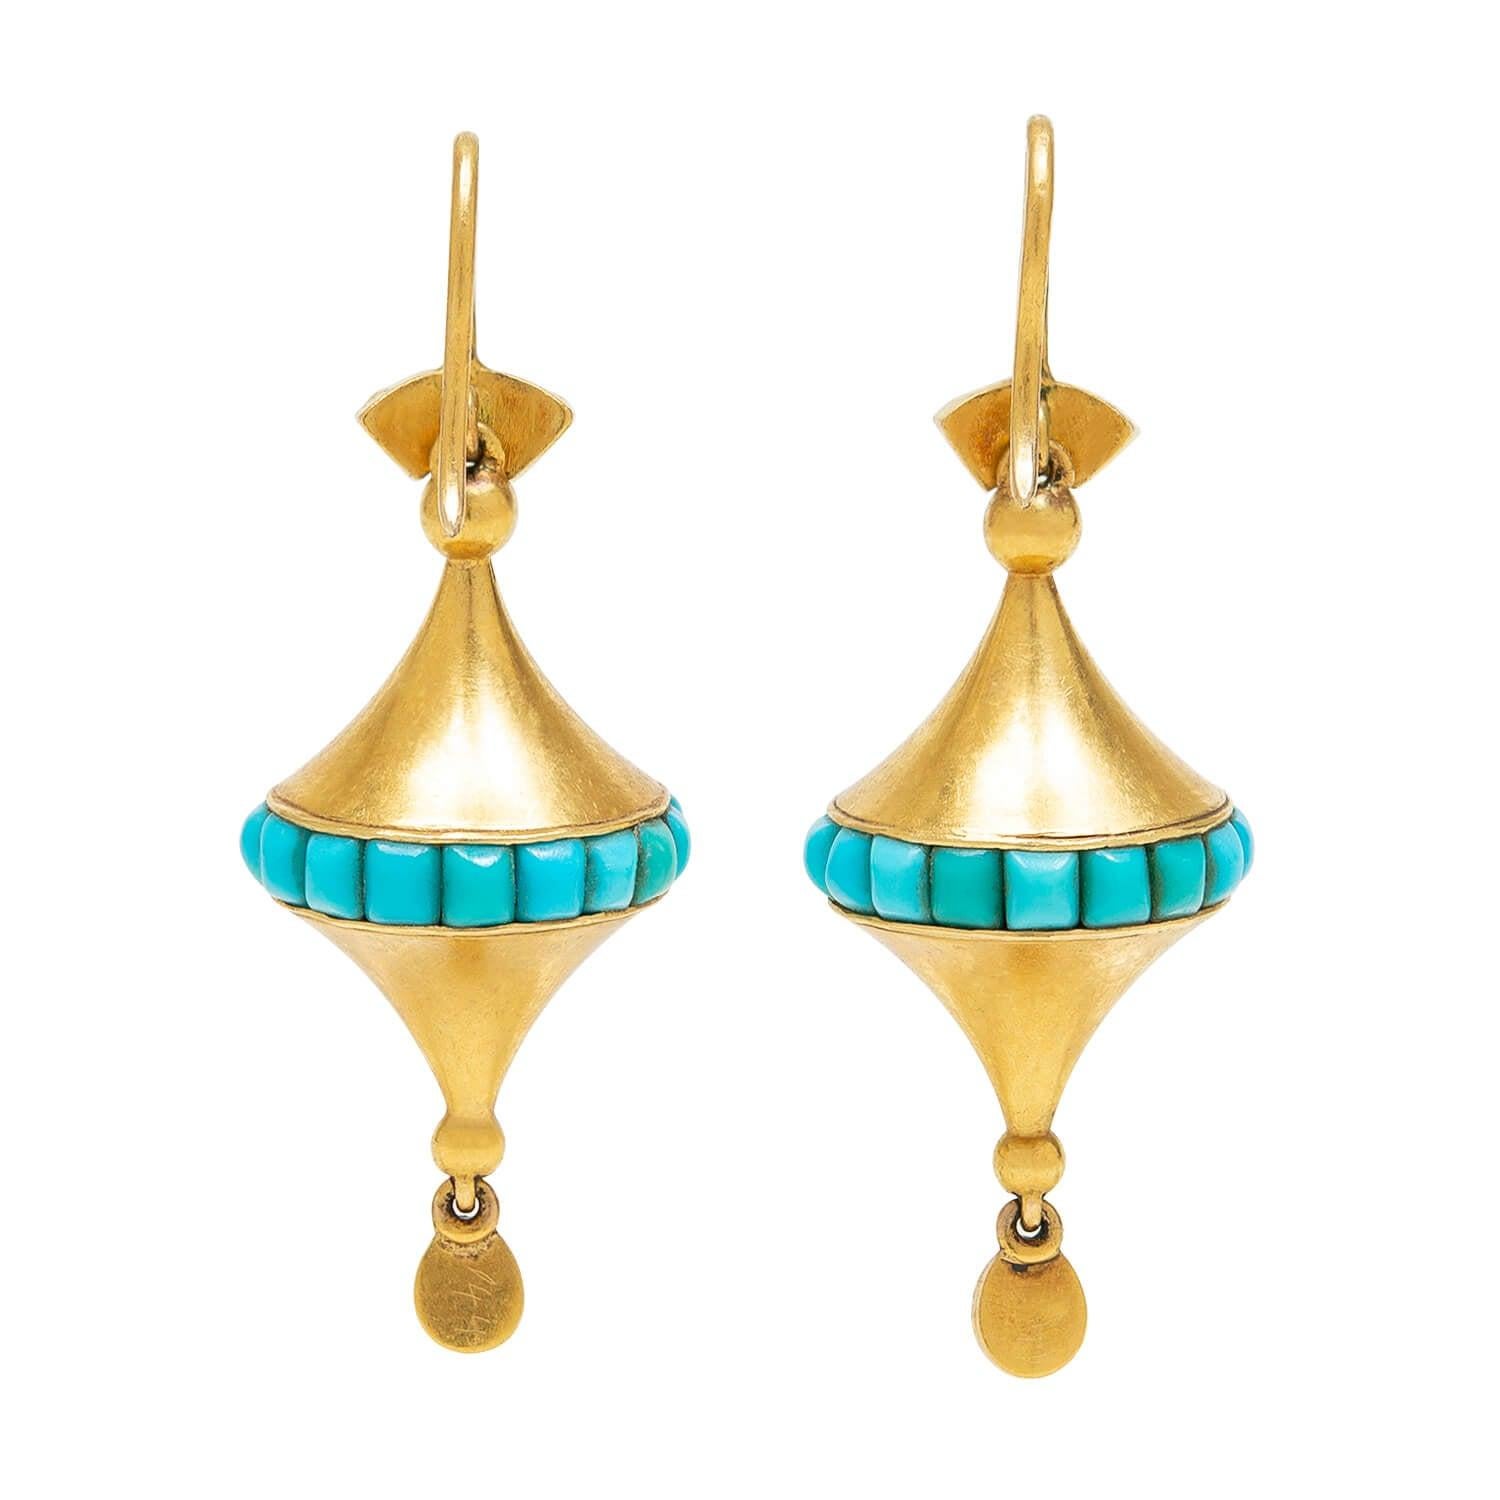 A beautiful pair of turquoise and gold earrings from the Victorian (ca1880s) era! These earrings have a lovely rhombus design and look simply wonderful when worn. Each earring begins with a decorative 18kt gold topper, which holds two turquoise